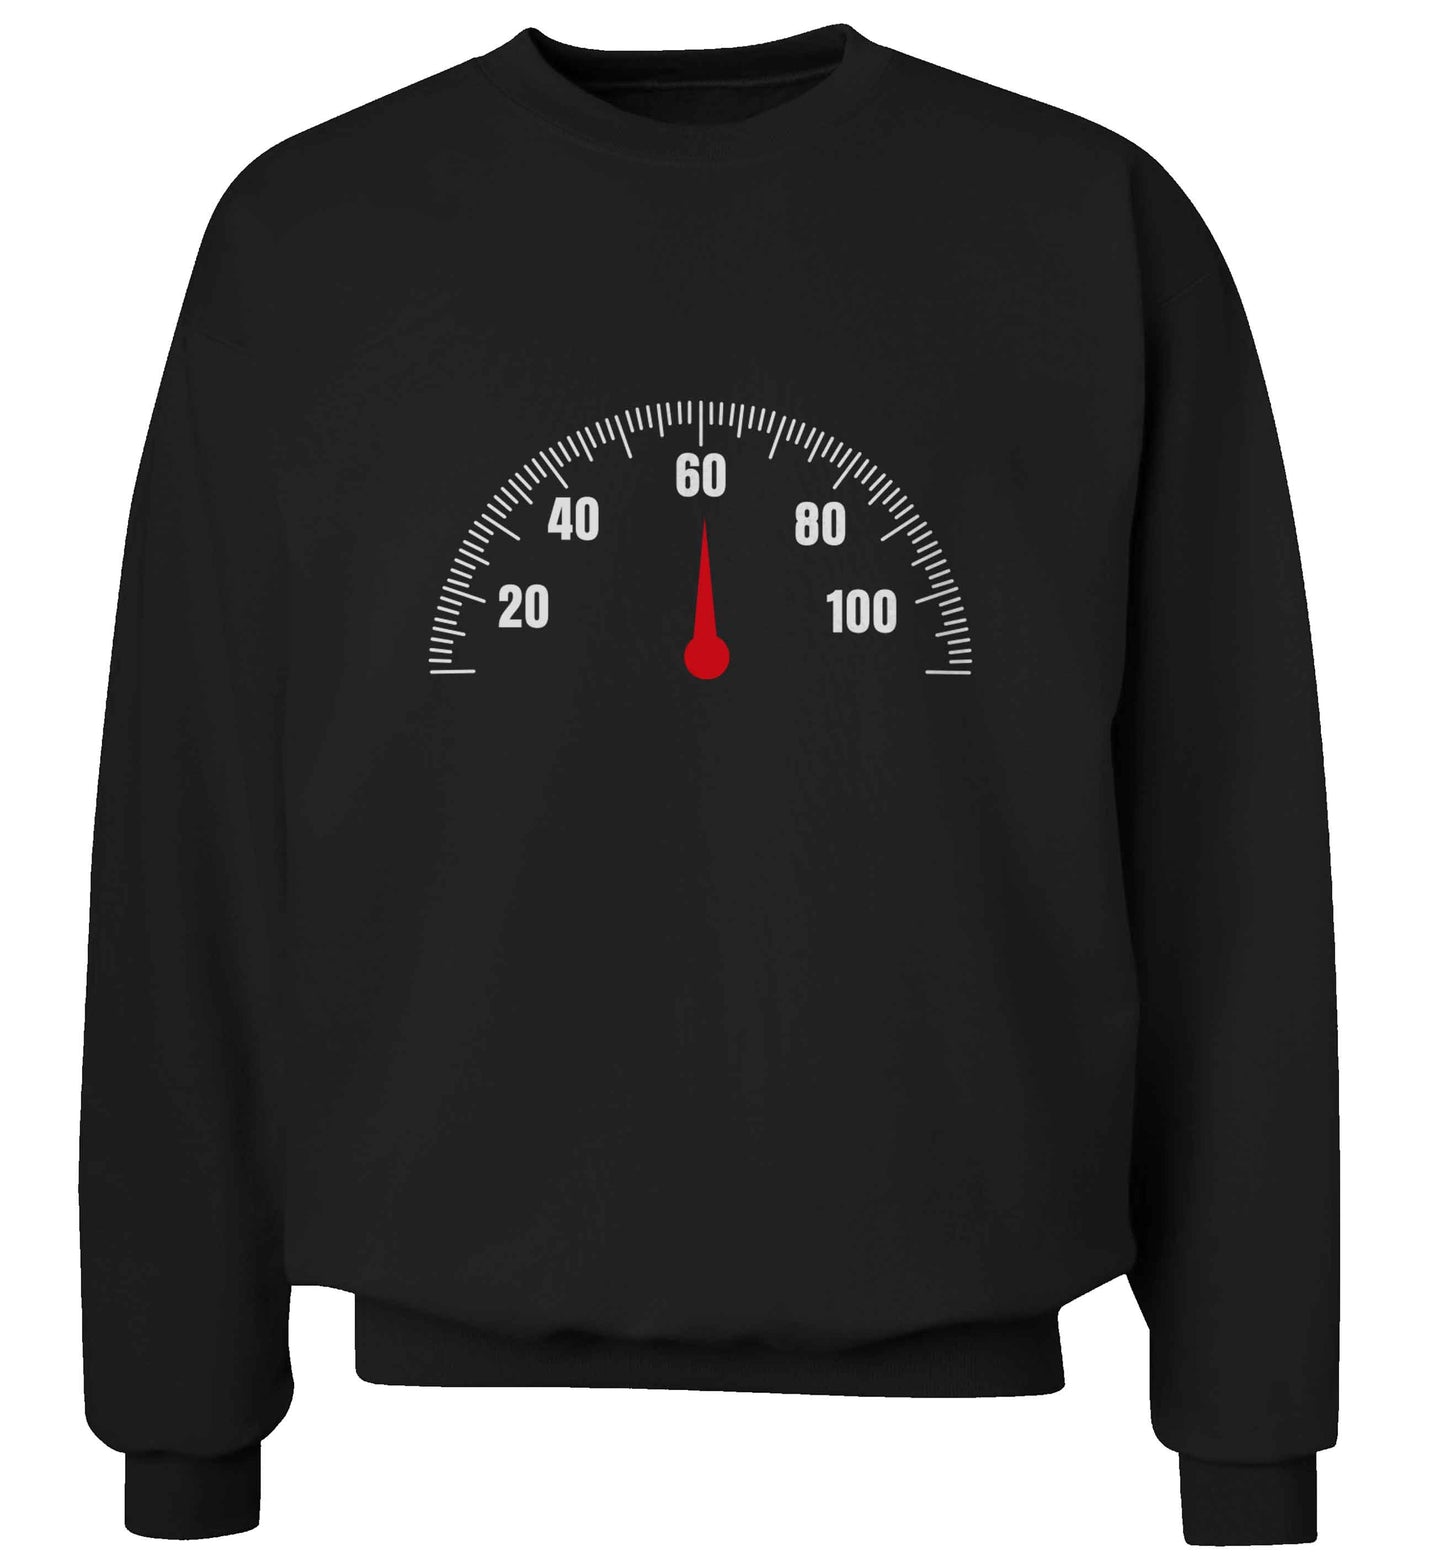 Speed dial 60 adult's unisex black sweater 2XL